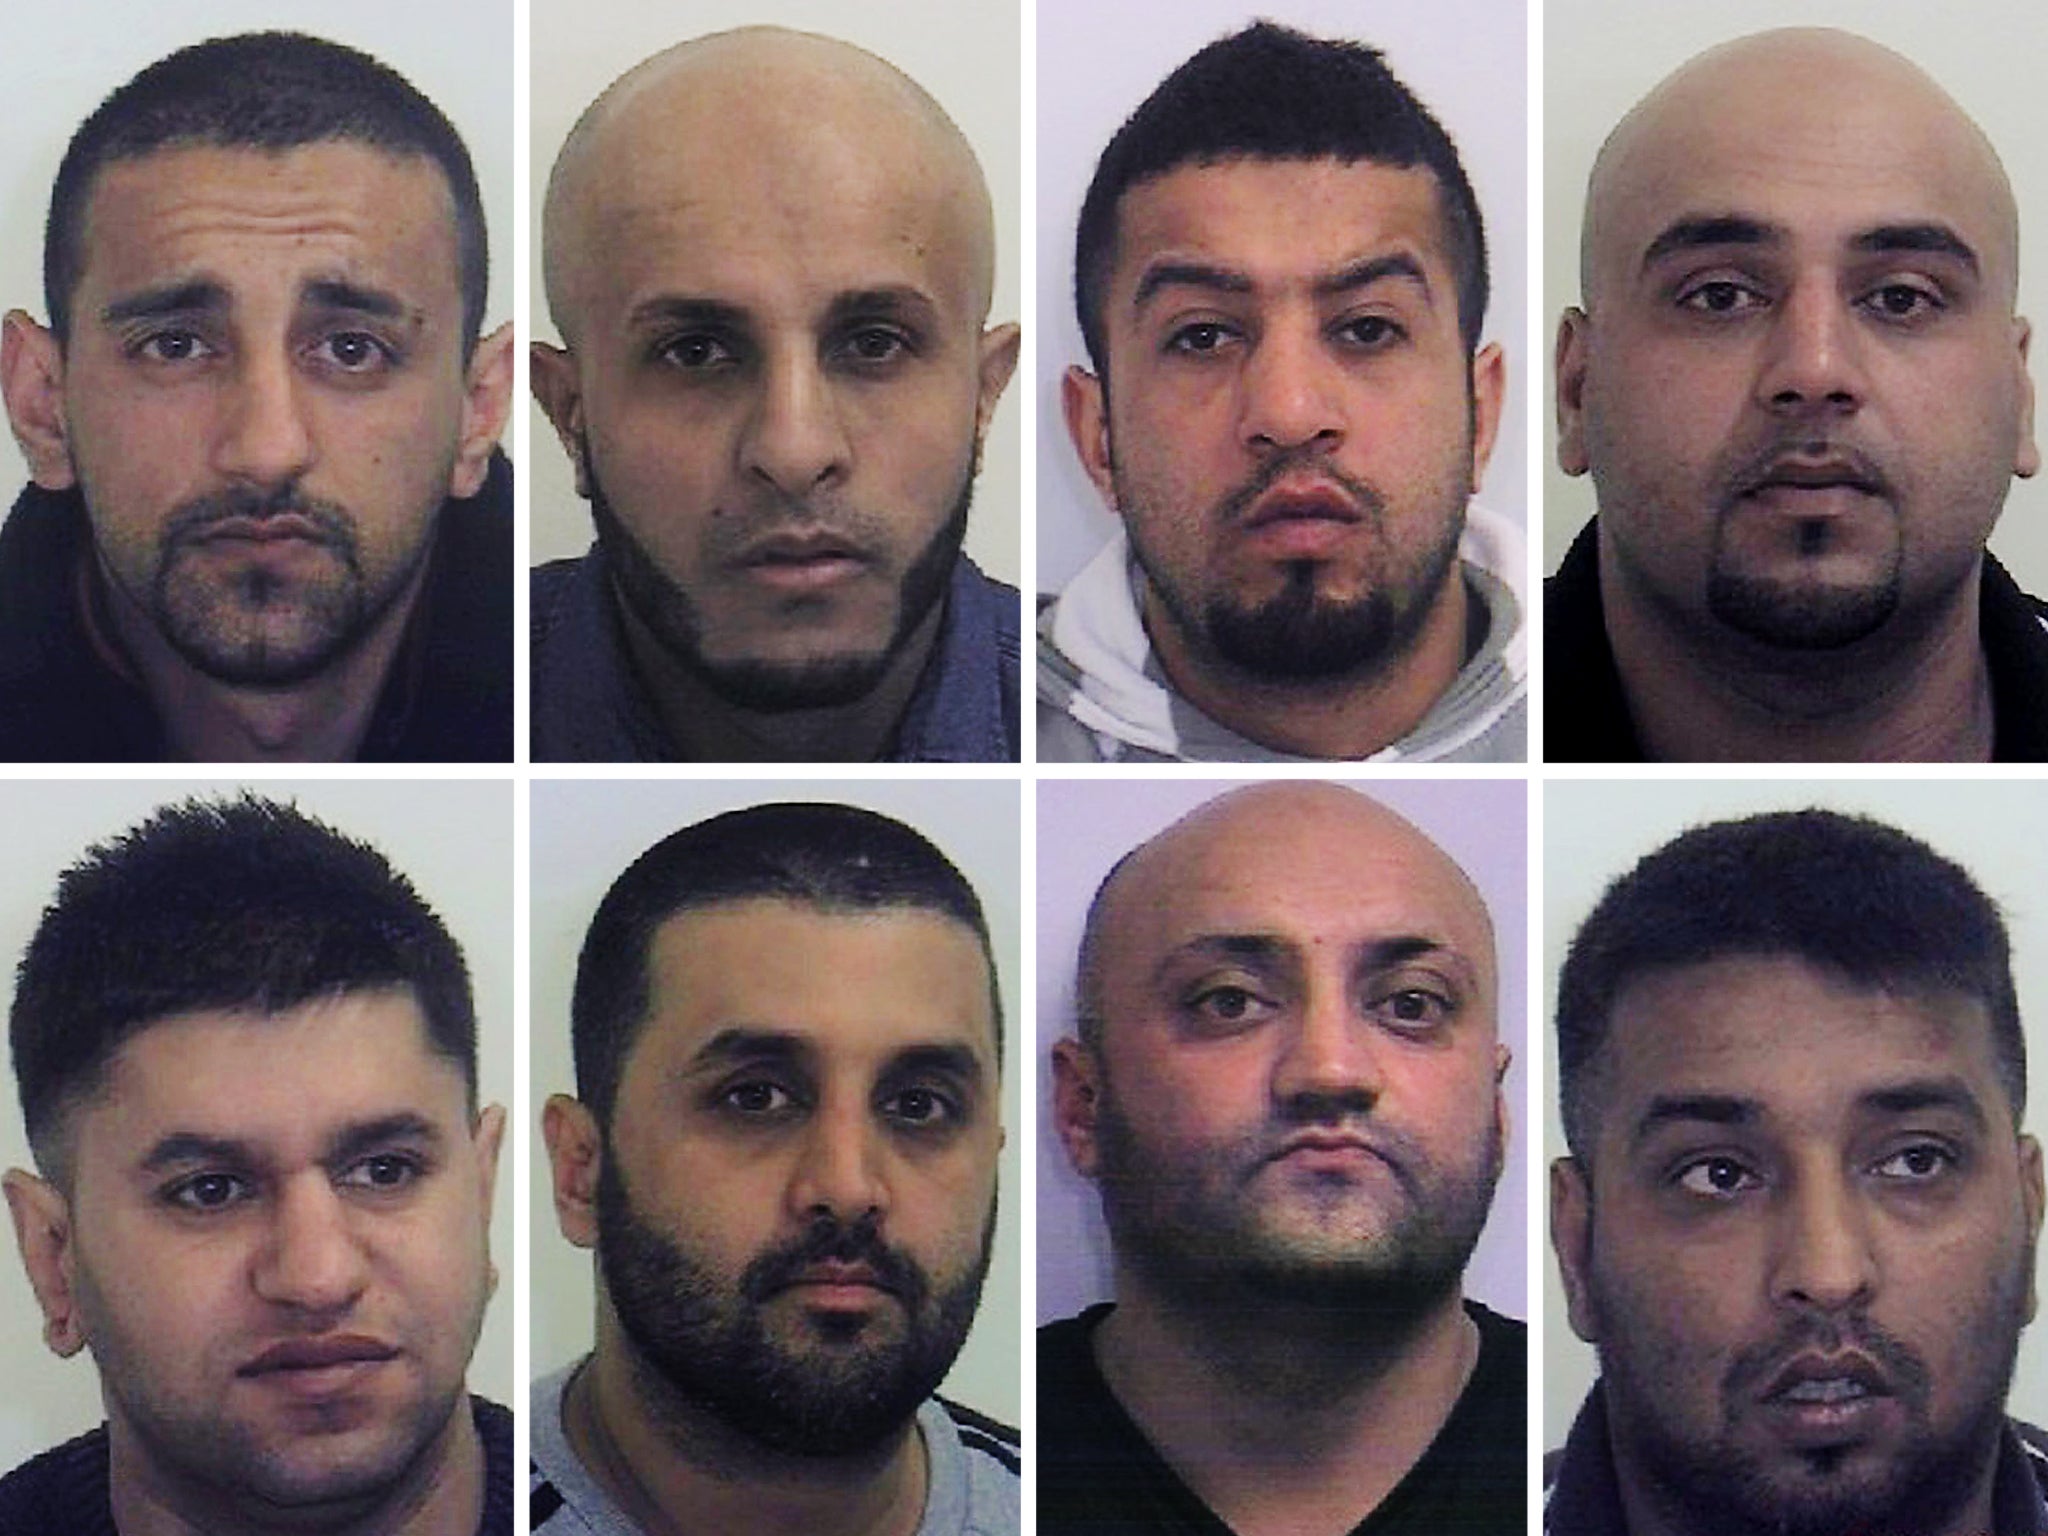 Several members of grooming gangs in Rotherham have already been convicted and dozens more are to be put on trial